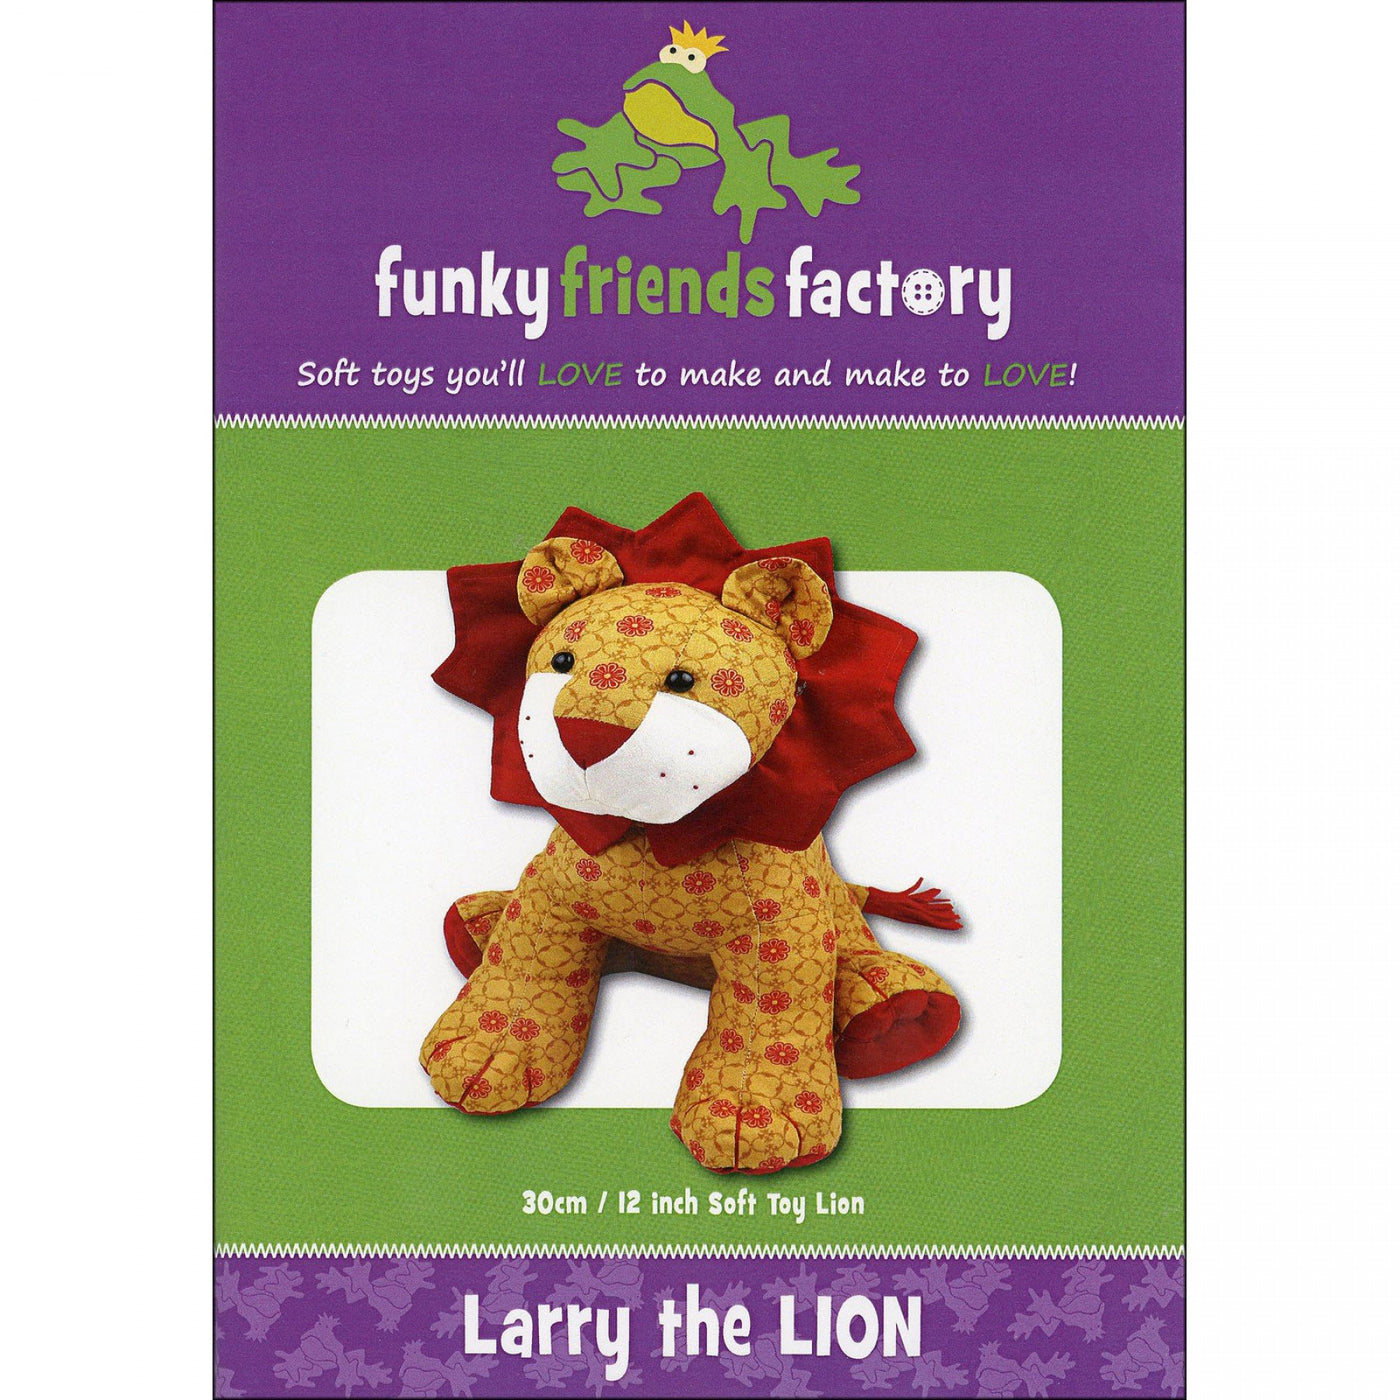 Larry The Lion by Funky Friends Factory